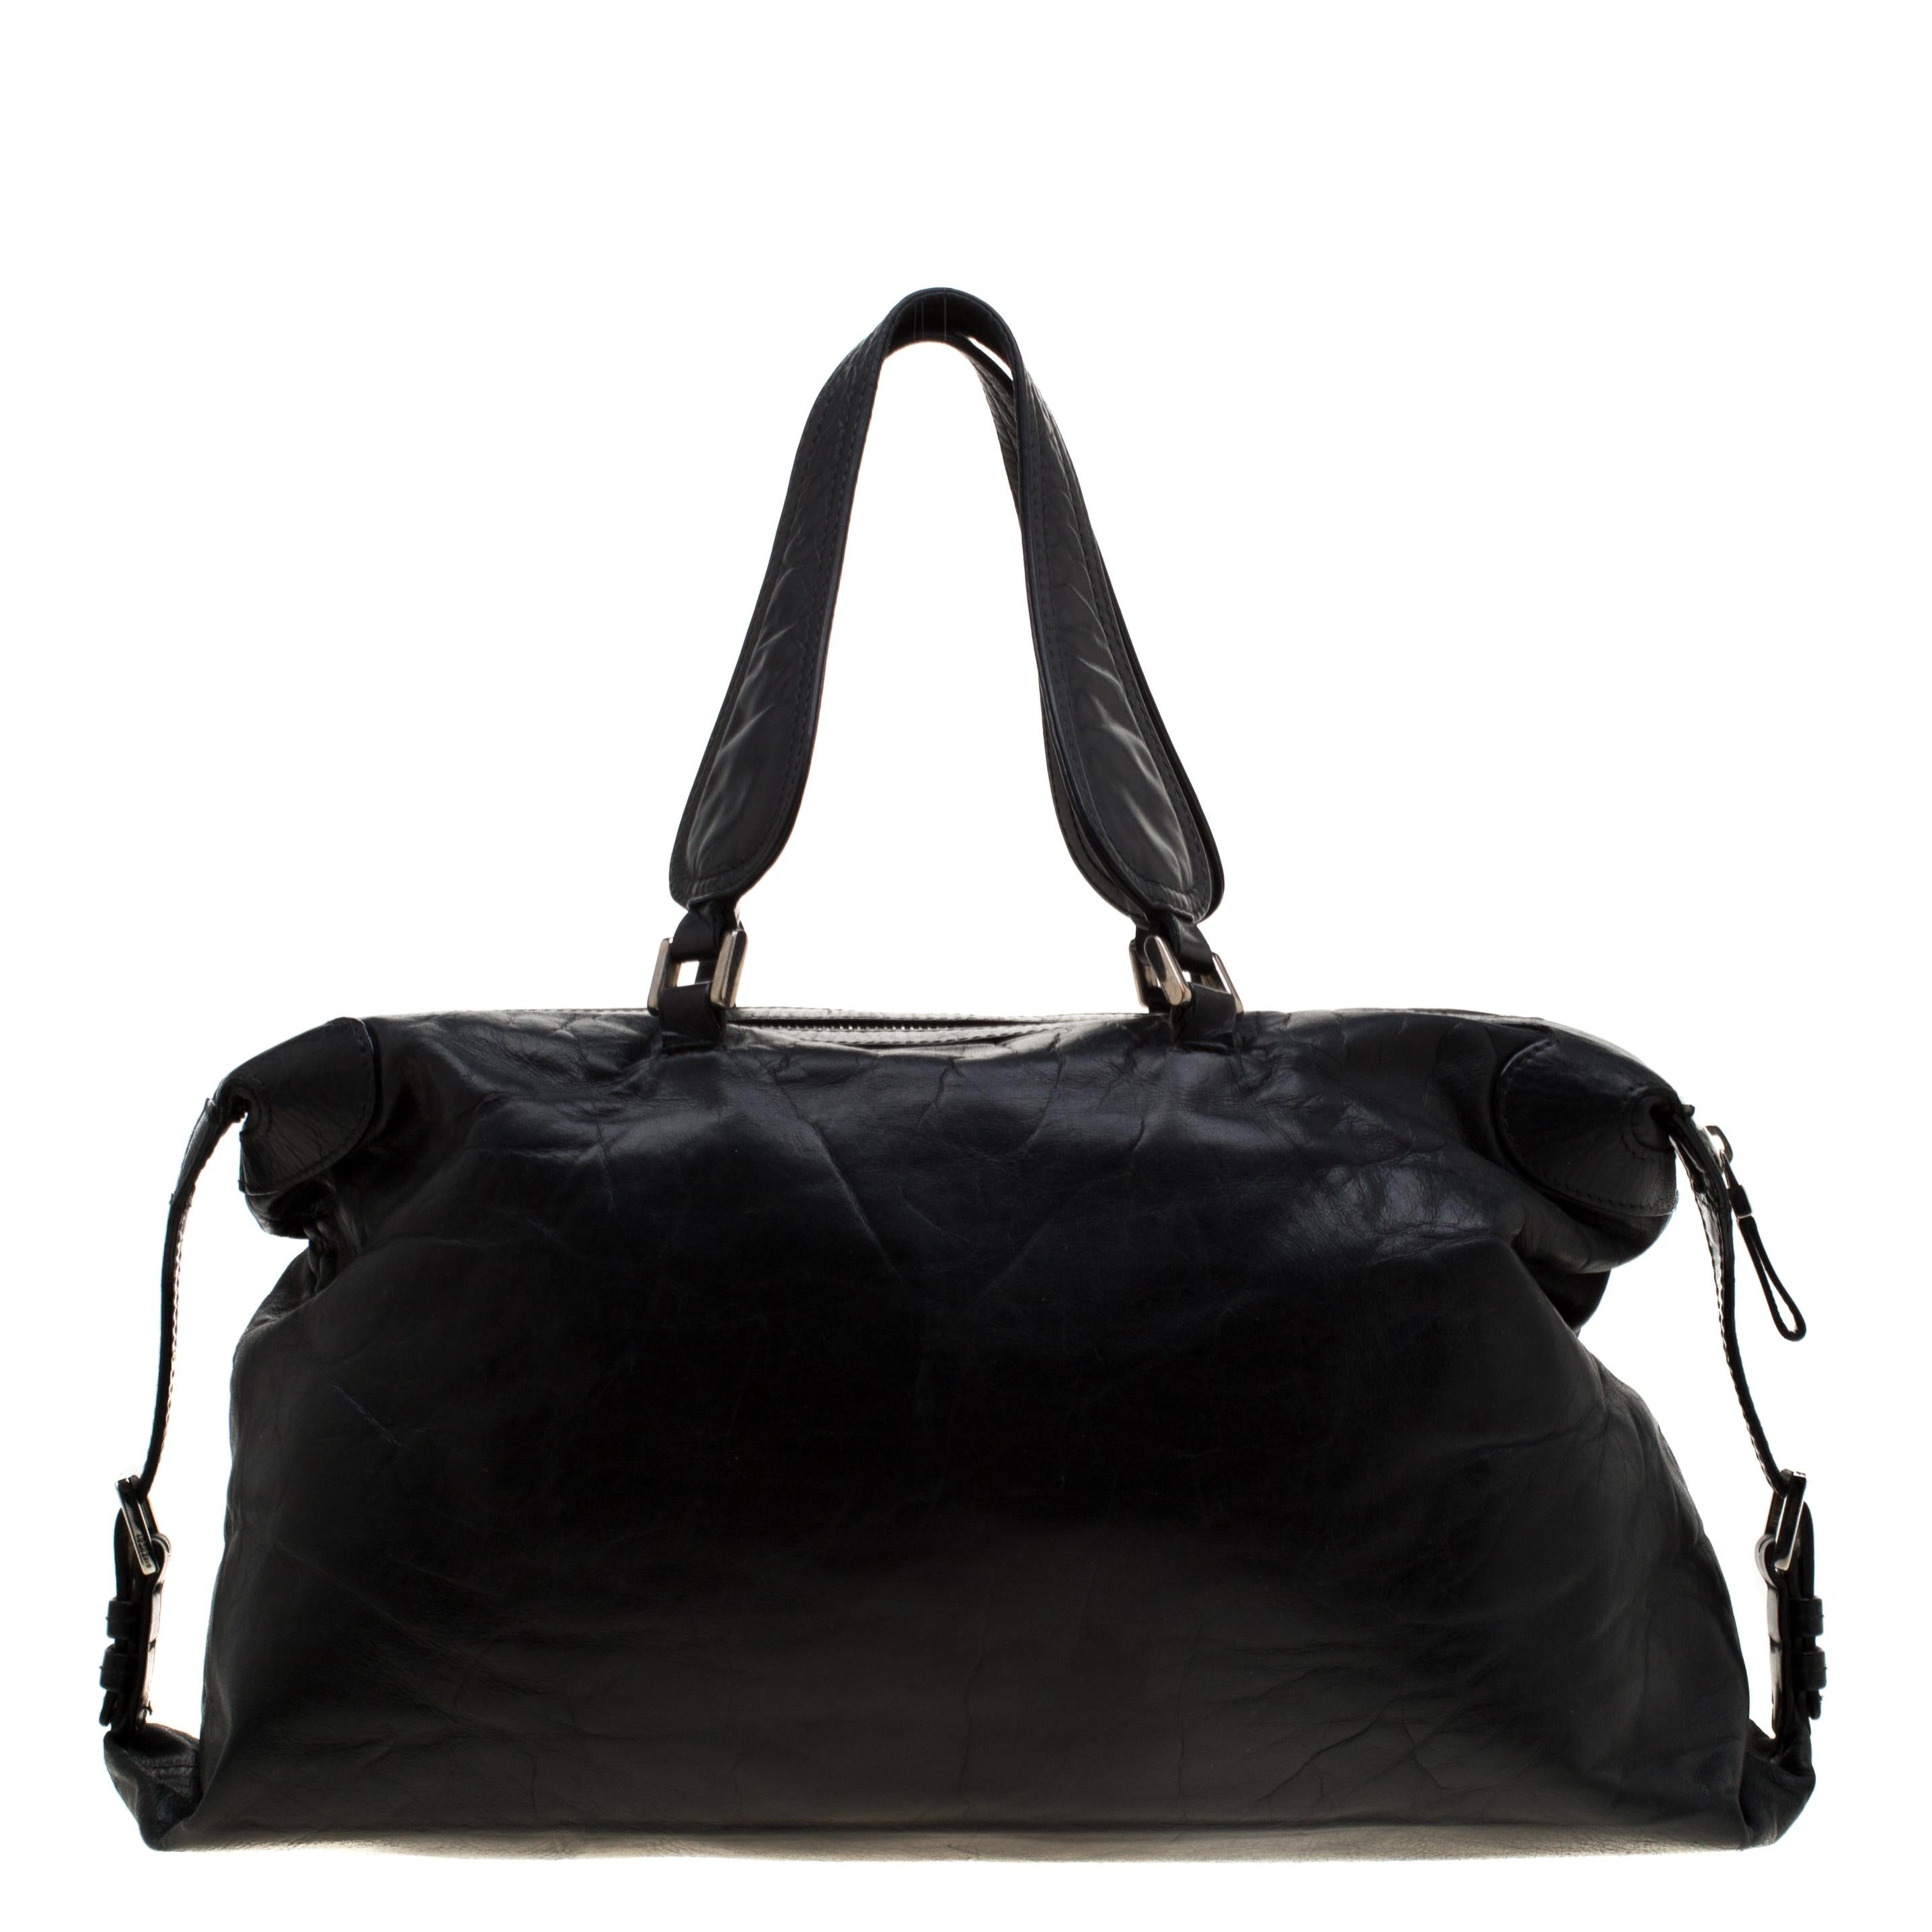 Excellently crafted from black leather for a classy touch, this Nightingale bag from Givenchy is a creation that is ideal for daily use and on your travels. It features the logo on the front, two top handles, a shoulder strap, and a spacious fabric